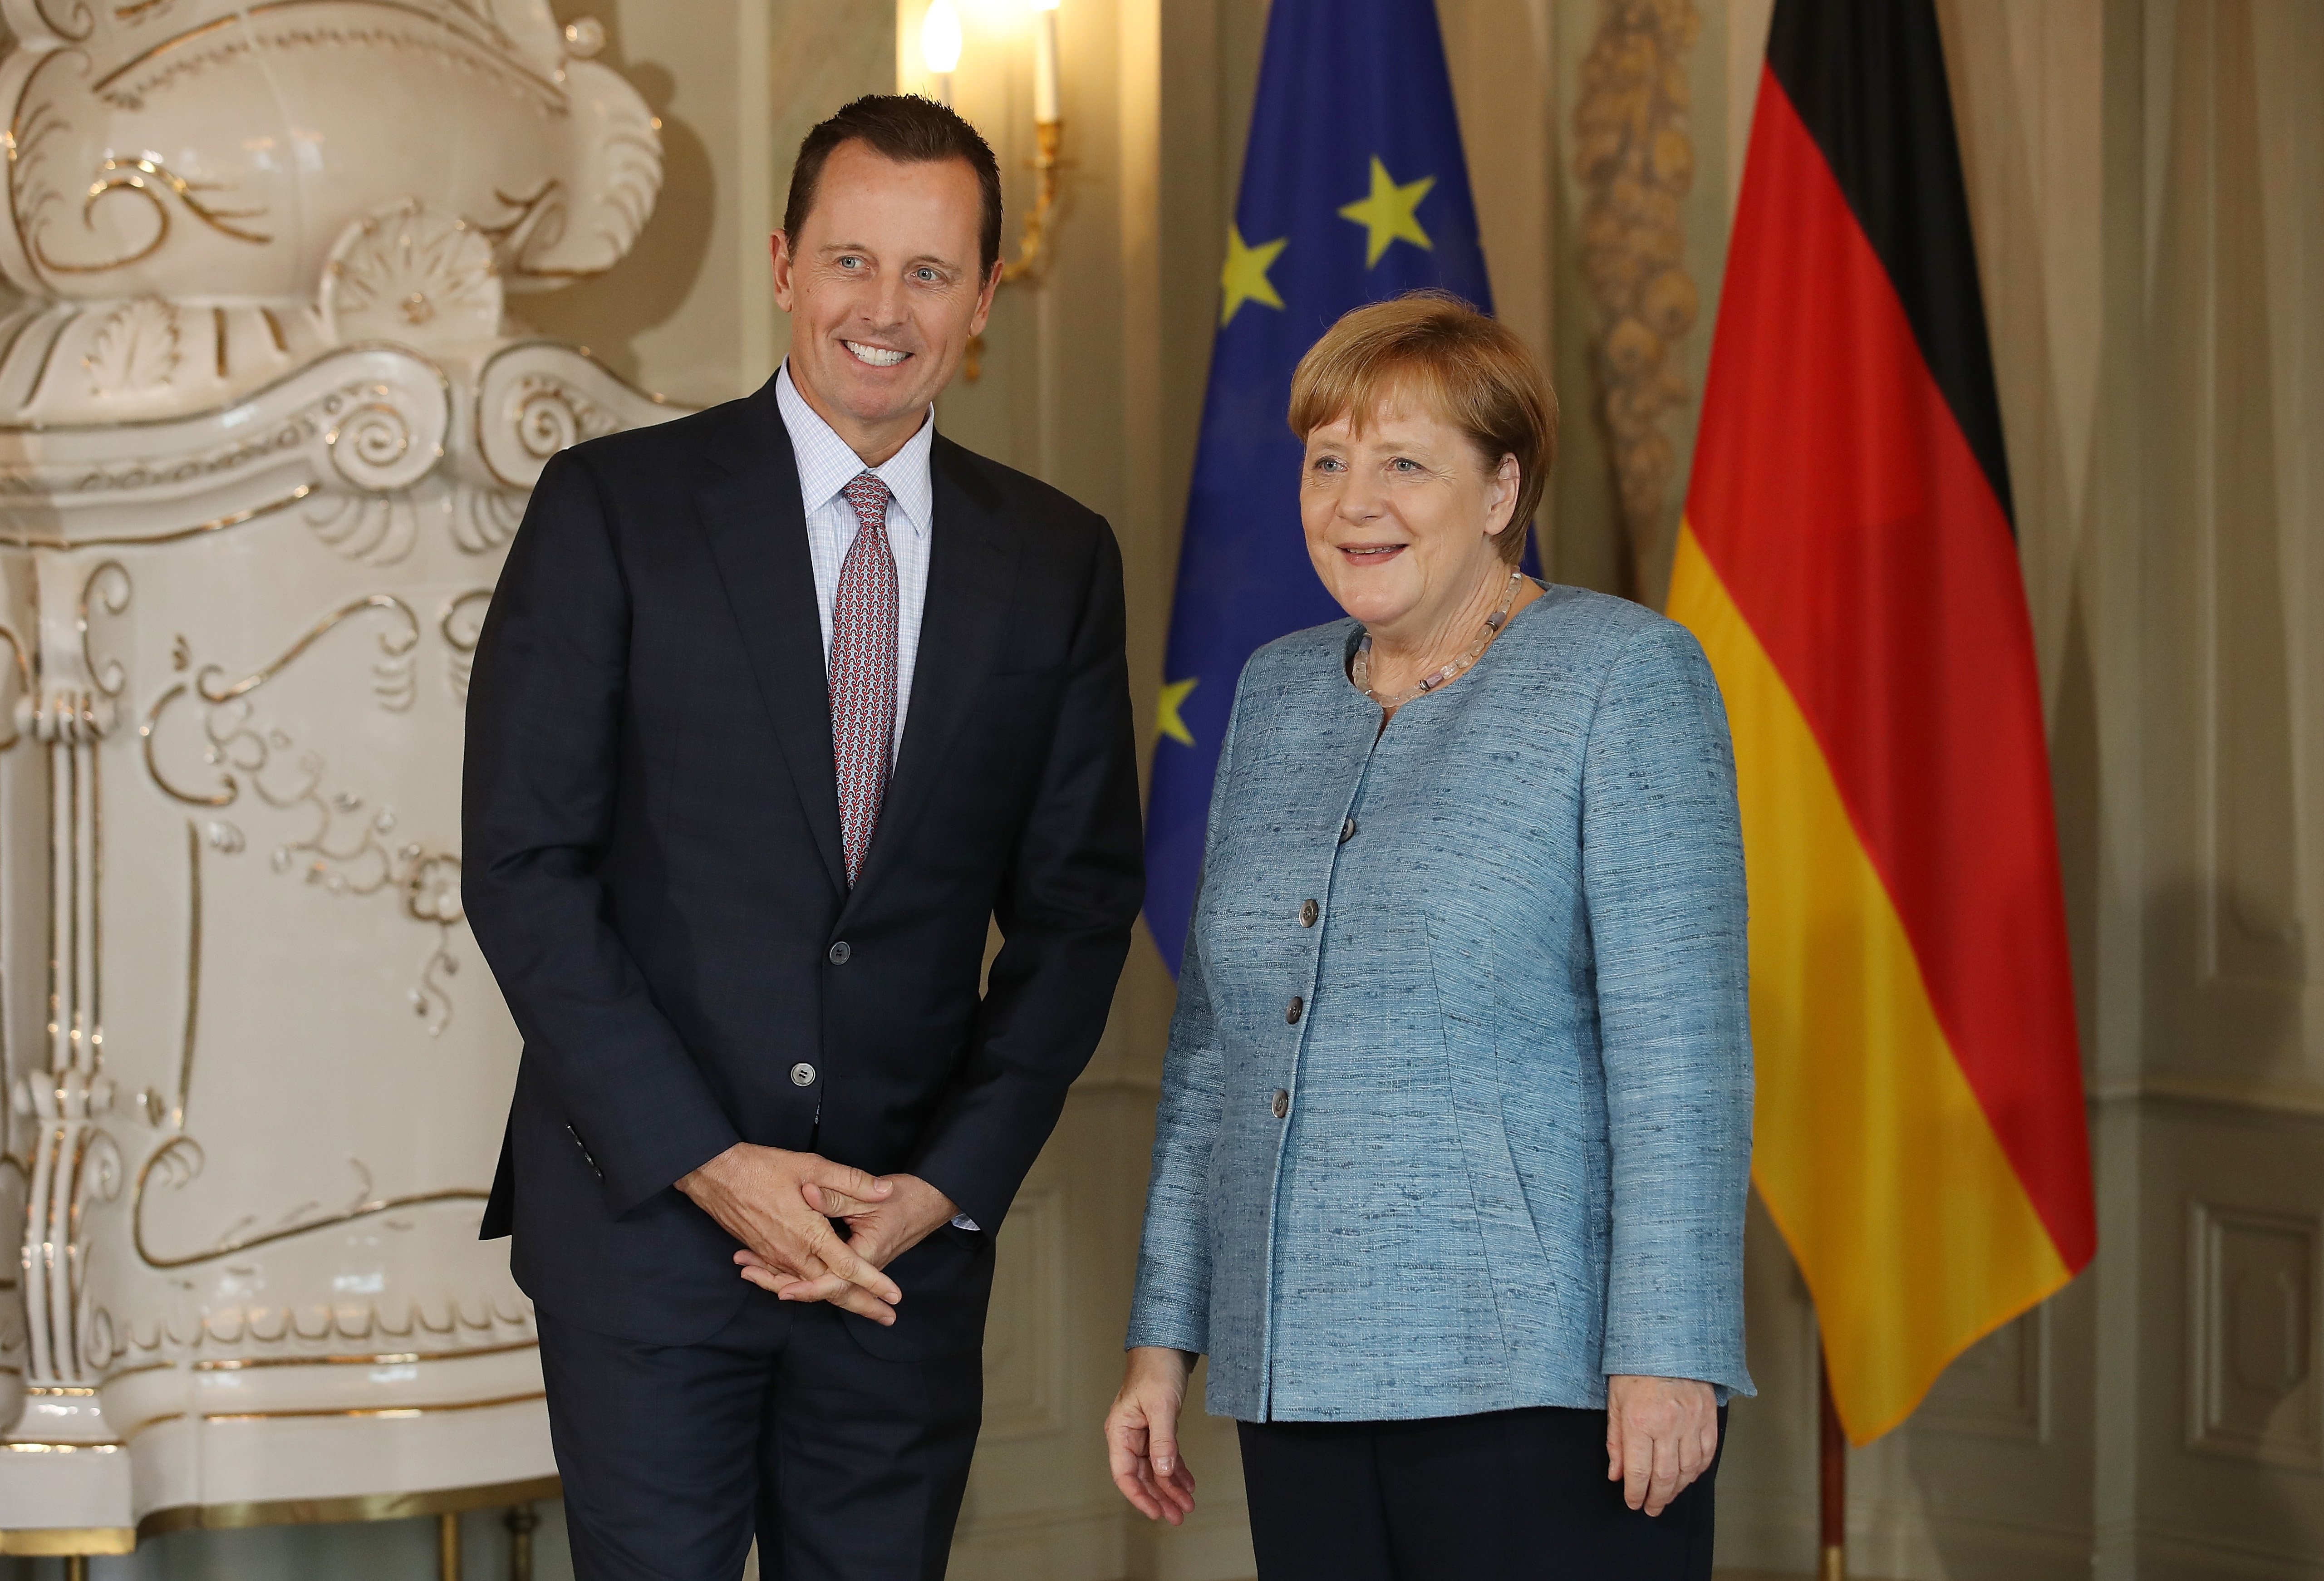 GRANSEE, GERMANY - JULY 06: U.S. Ambassador Richard Grenell poses for a photo with German Chancellor Angela Merkel upon his arrival at a reception for the diplomatic corps hosted by Merkel at Schloss Meseberg palace on July 6, 2018 near Gransee, Germany. Grenell, who was appointed ambassador by U.S. President Donald Trump, recently met with German auto executives to propose a cancelleation of tariffs on cars by both the U.S. and Germany. (Photo by Sean Gallup/Getty Images)